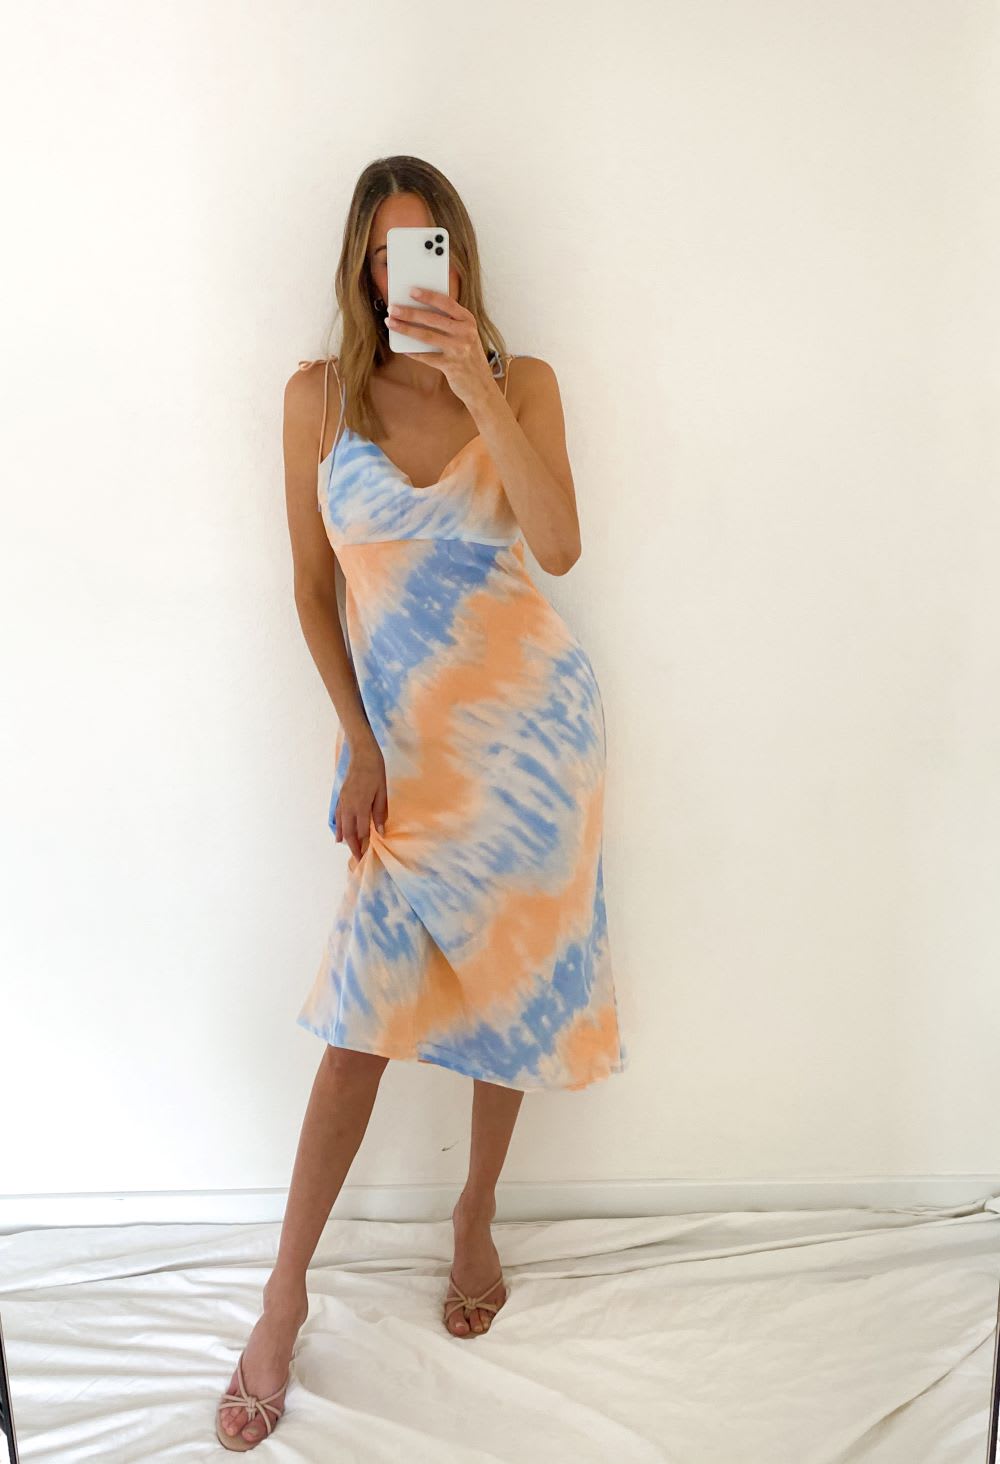 Tie-Dye Outfits: 5 Ways to Wear the Trend - Lulus.com Fashion Blog